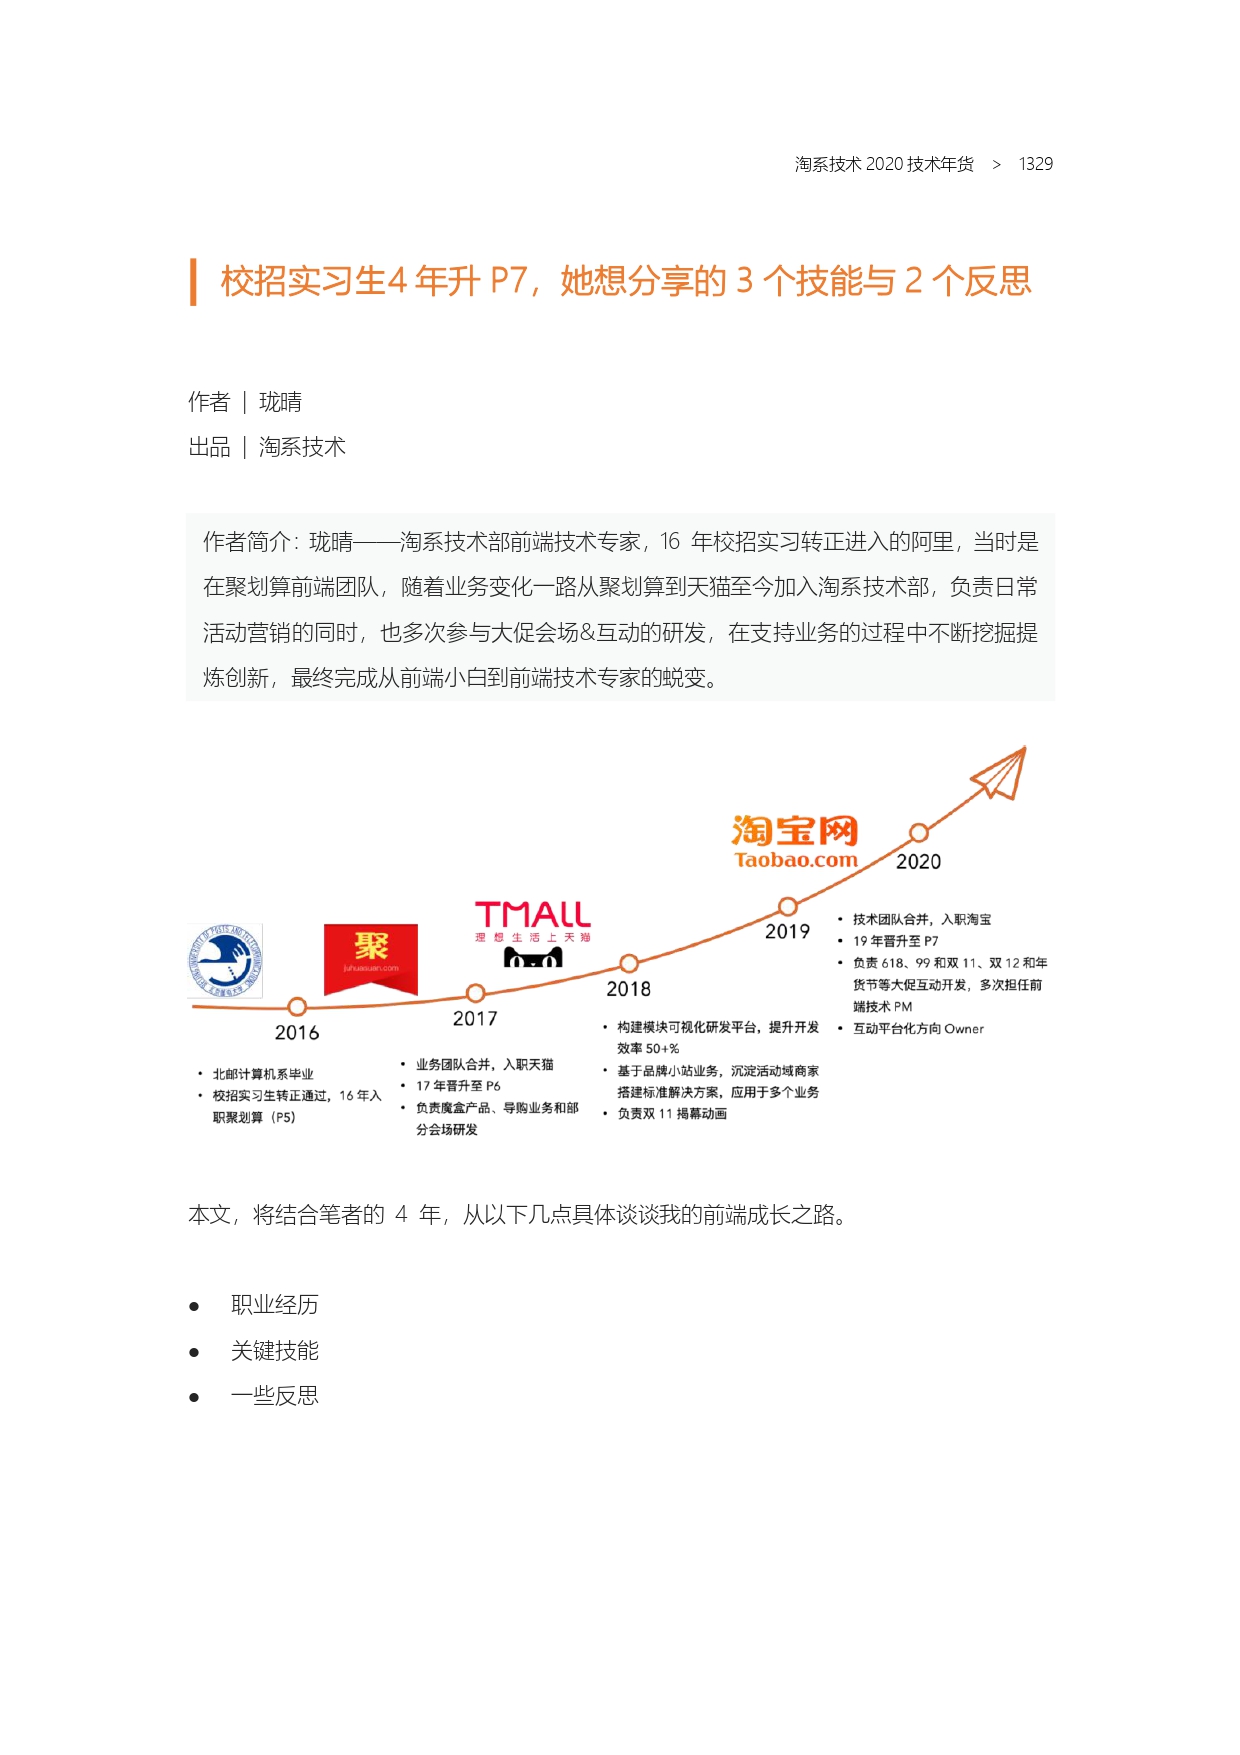 The Complete Works of Tao Technology 2020-1313-1671-1-195_page-0017.jpg